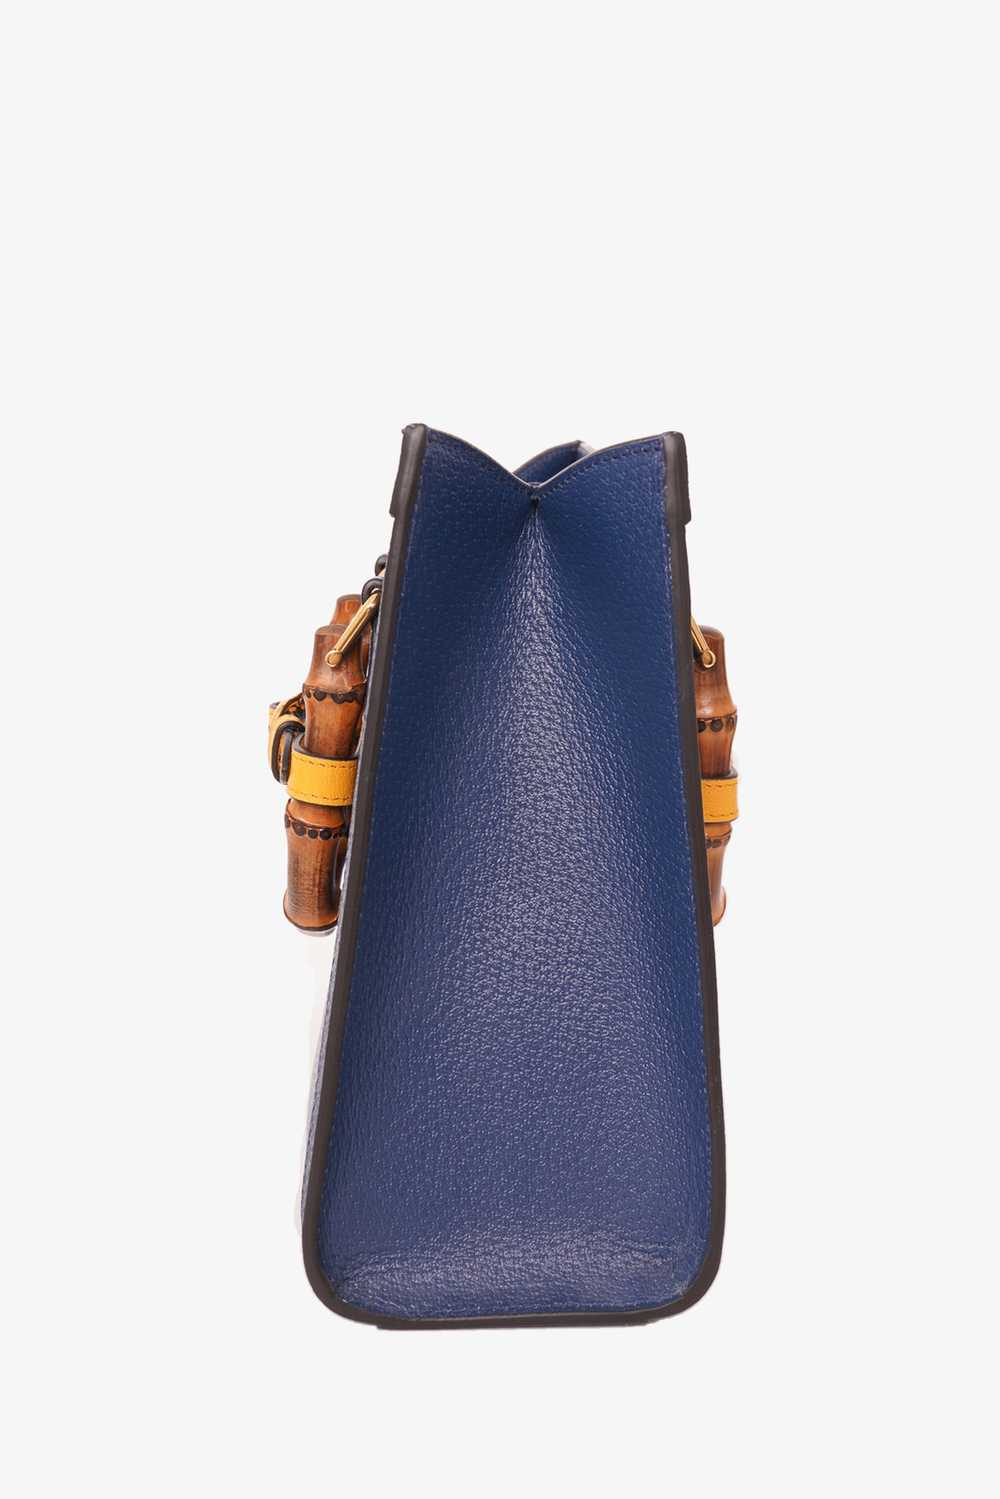 Gucci Blue Leather Diana Small Tote Bag - image 4